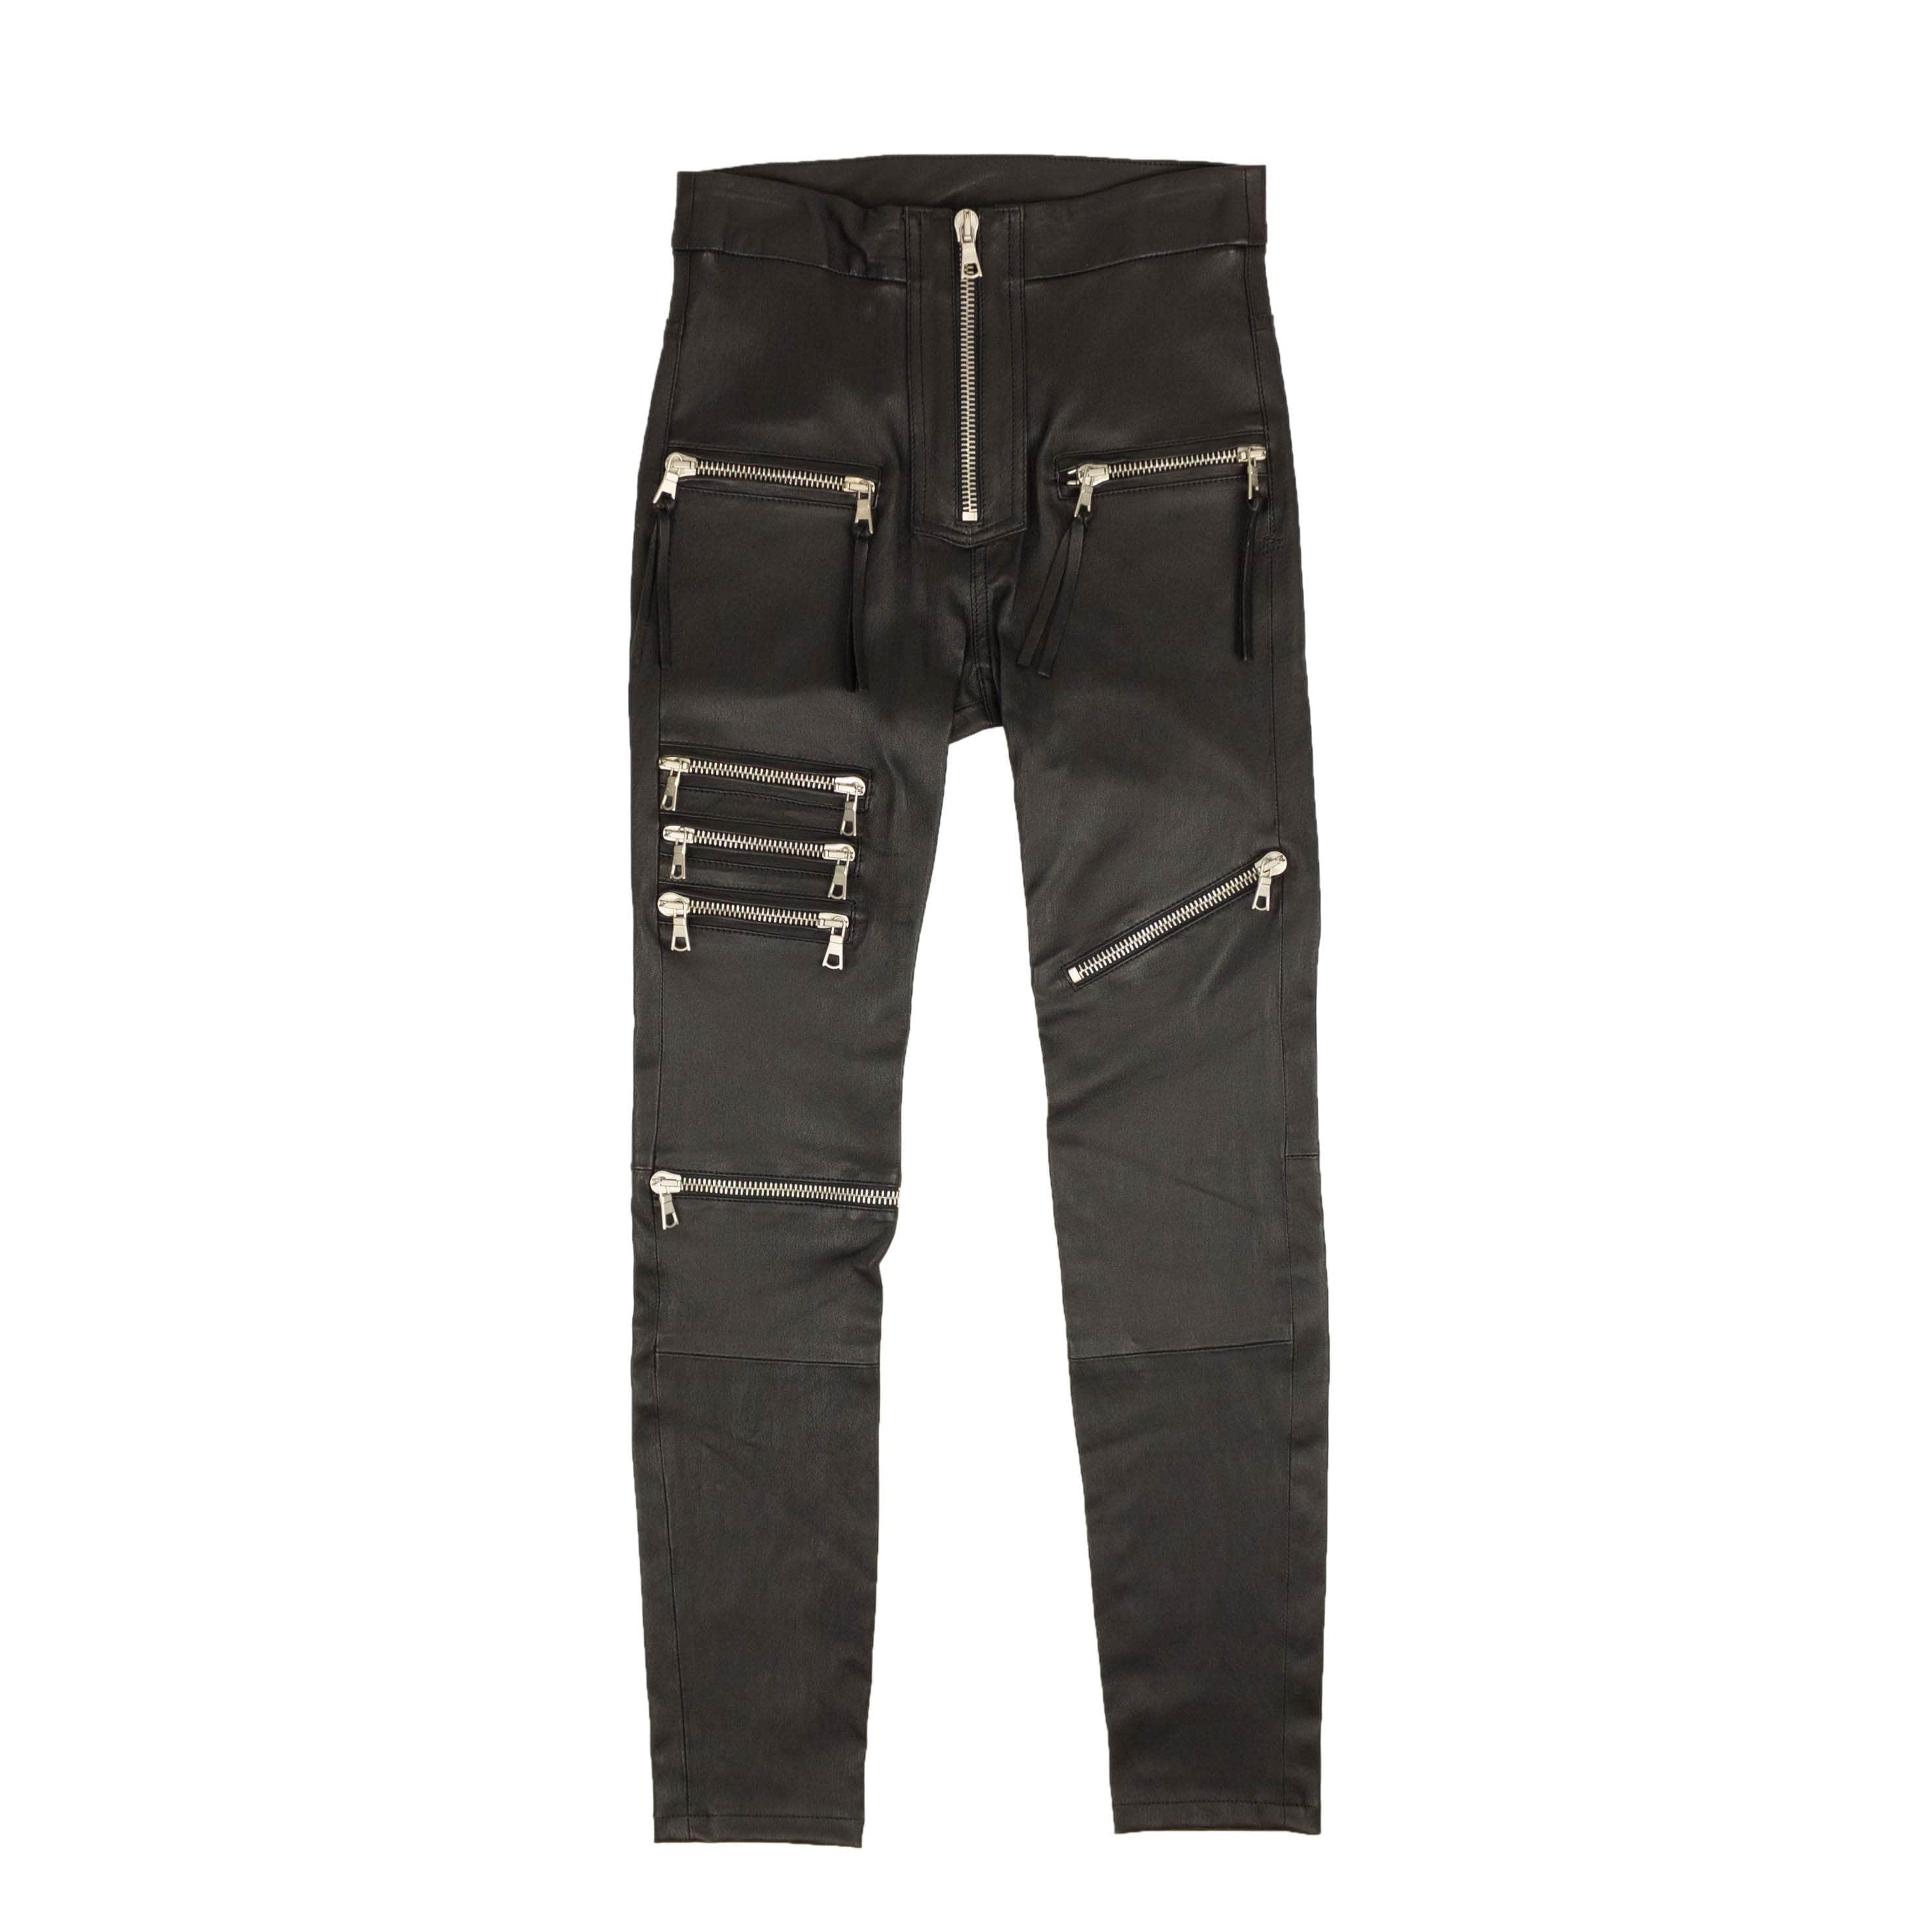 Unravel Project 500-750, channelenable-all, chicmi, couponcollection, gender-womens, main-clothing, size-24, size-25, size-26, size-27, size-28, unravel-project, womens-skinny-pants Black Leather Zipper Skinny Pants